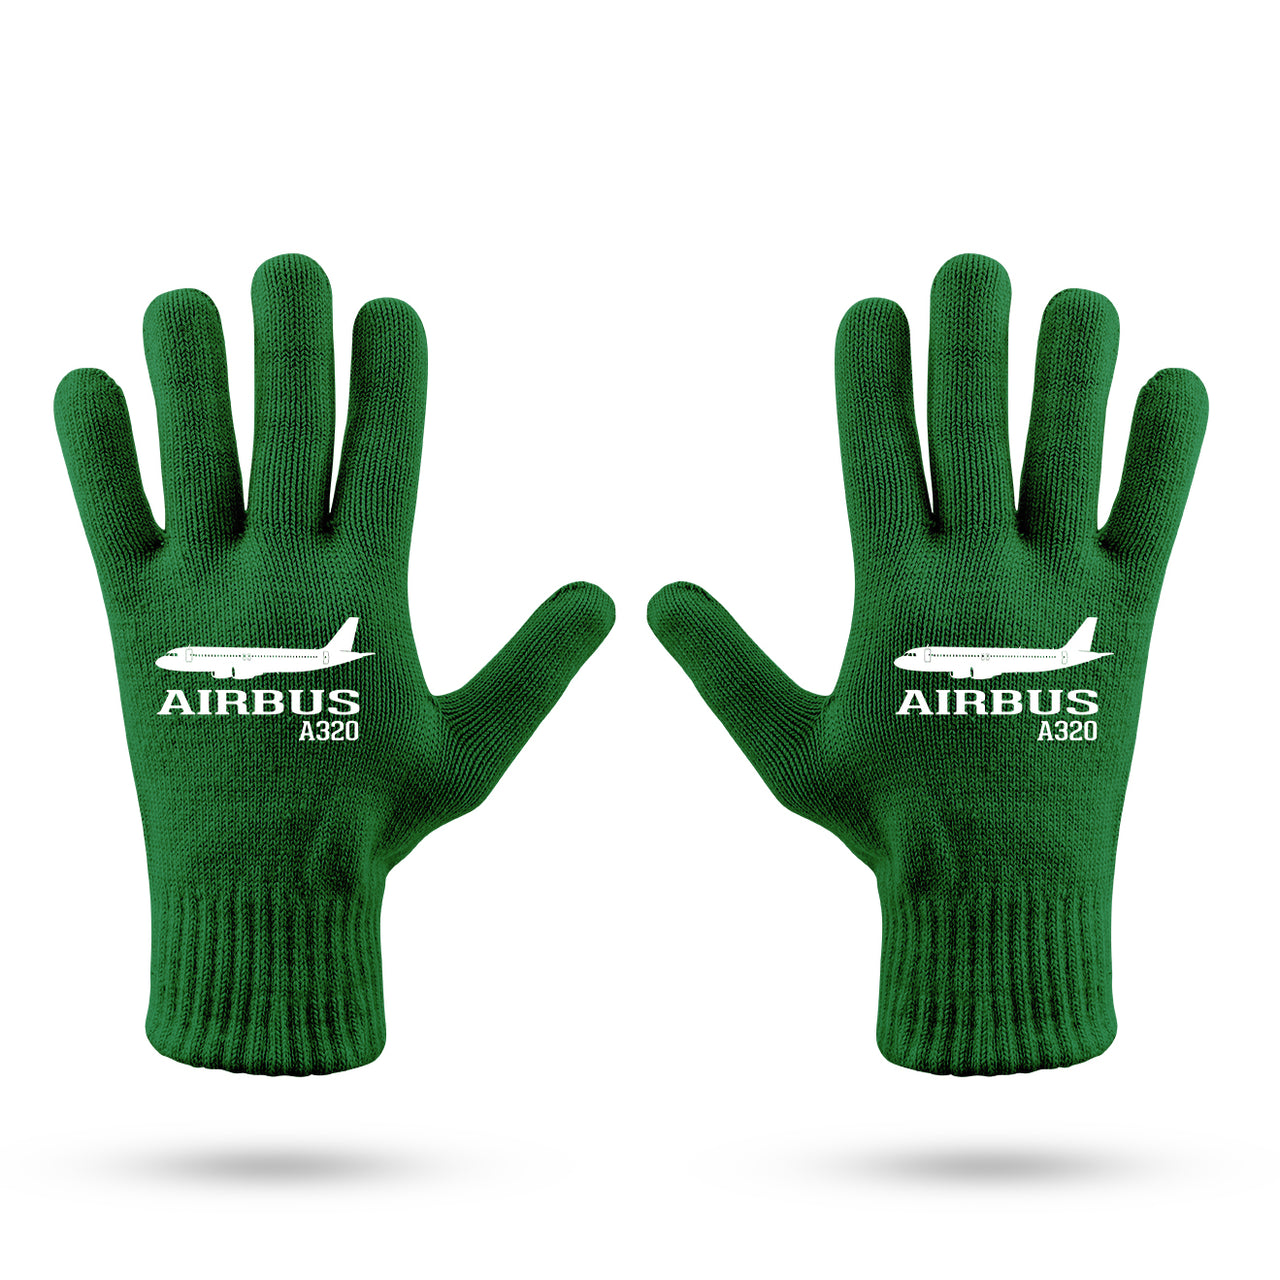 Airbus A320 Printed Designed Gloves